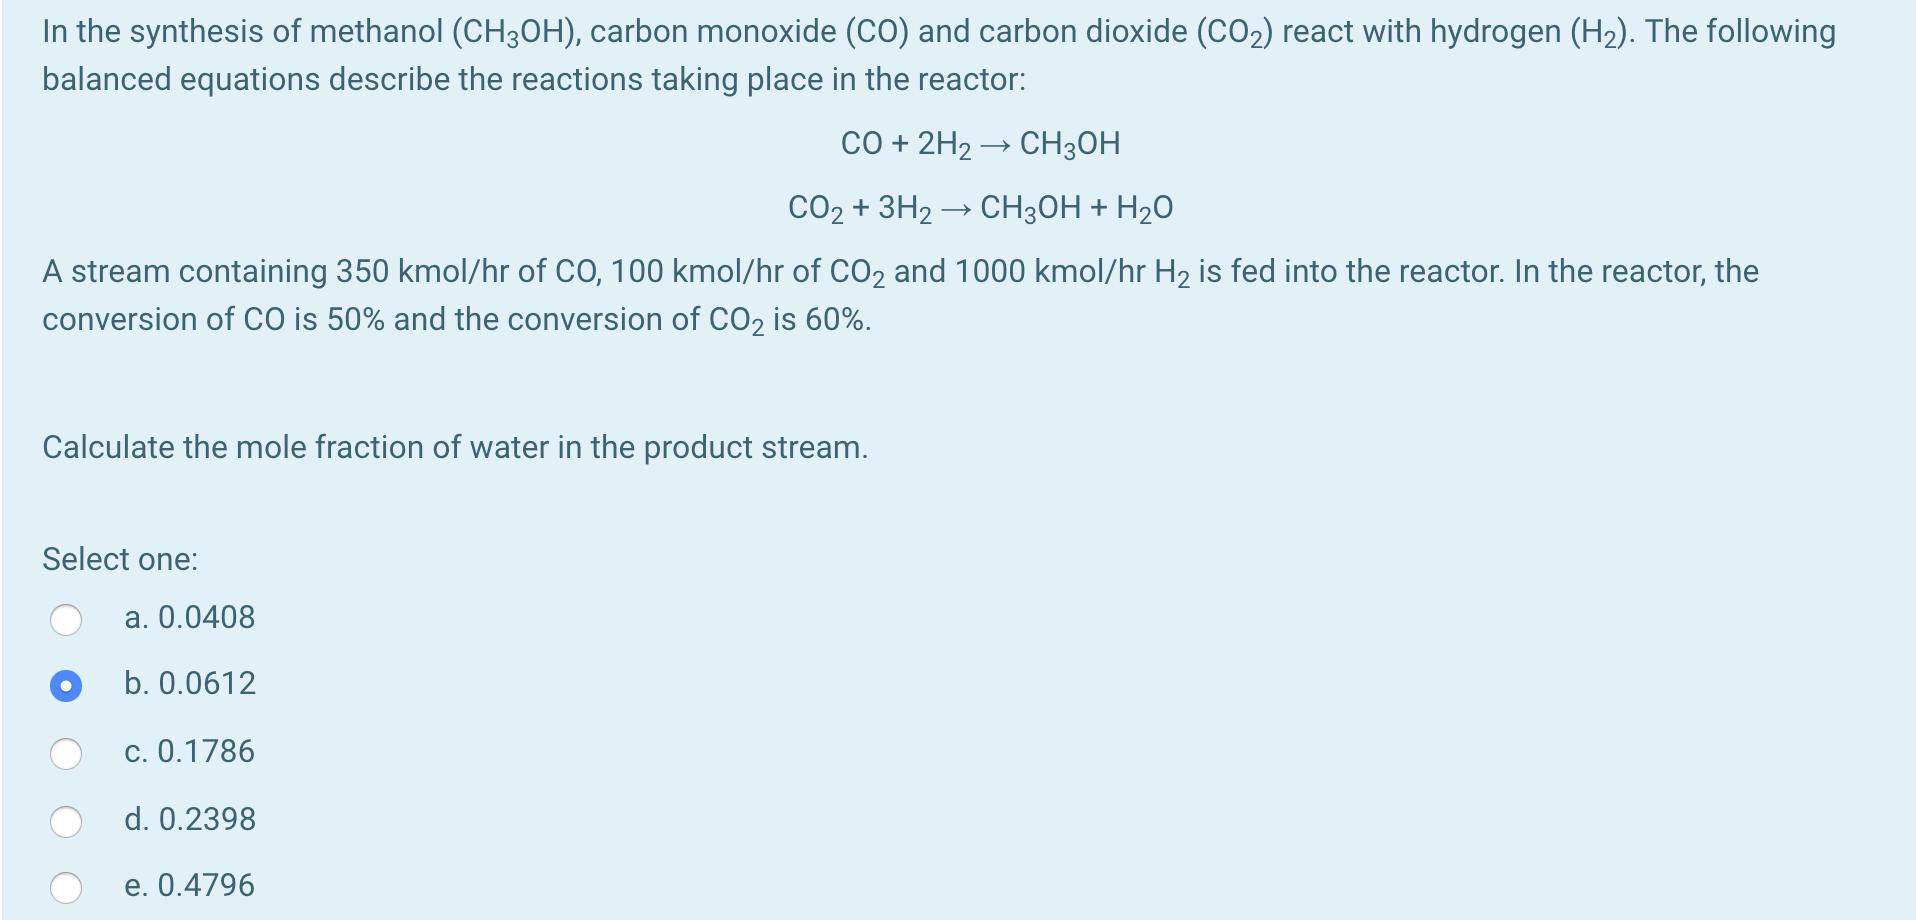 In the synthesis of methanol (CH3OH), carbon monoxide (CO) and carbon dioxide (CO2) react with hydrogen (H2). The following b